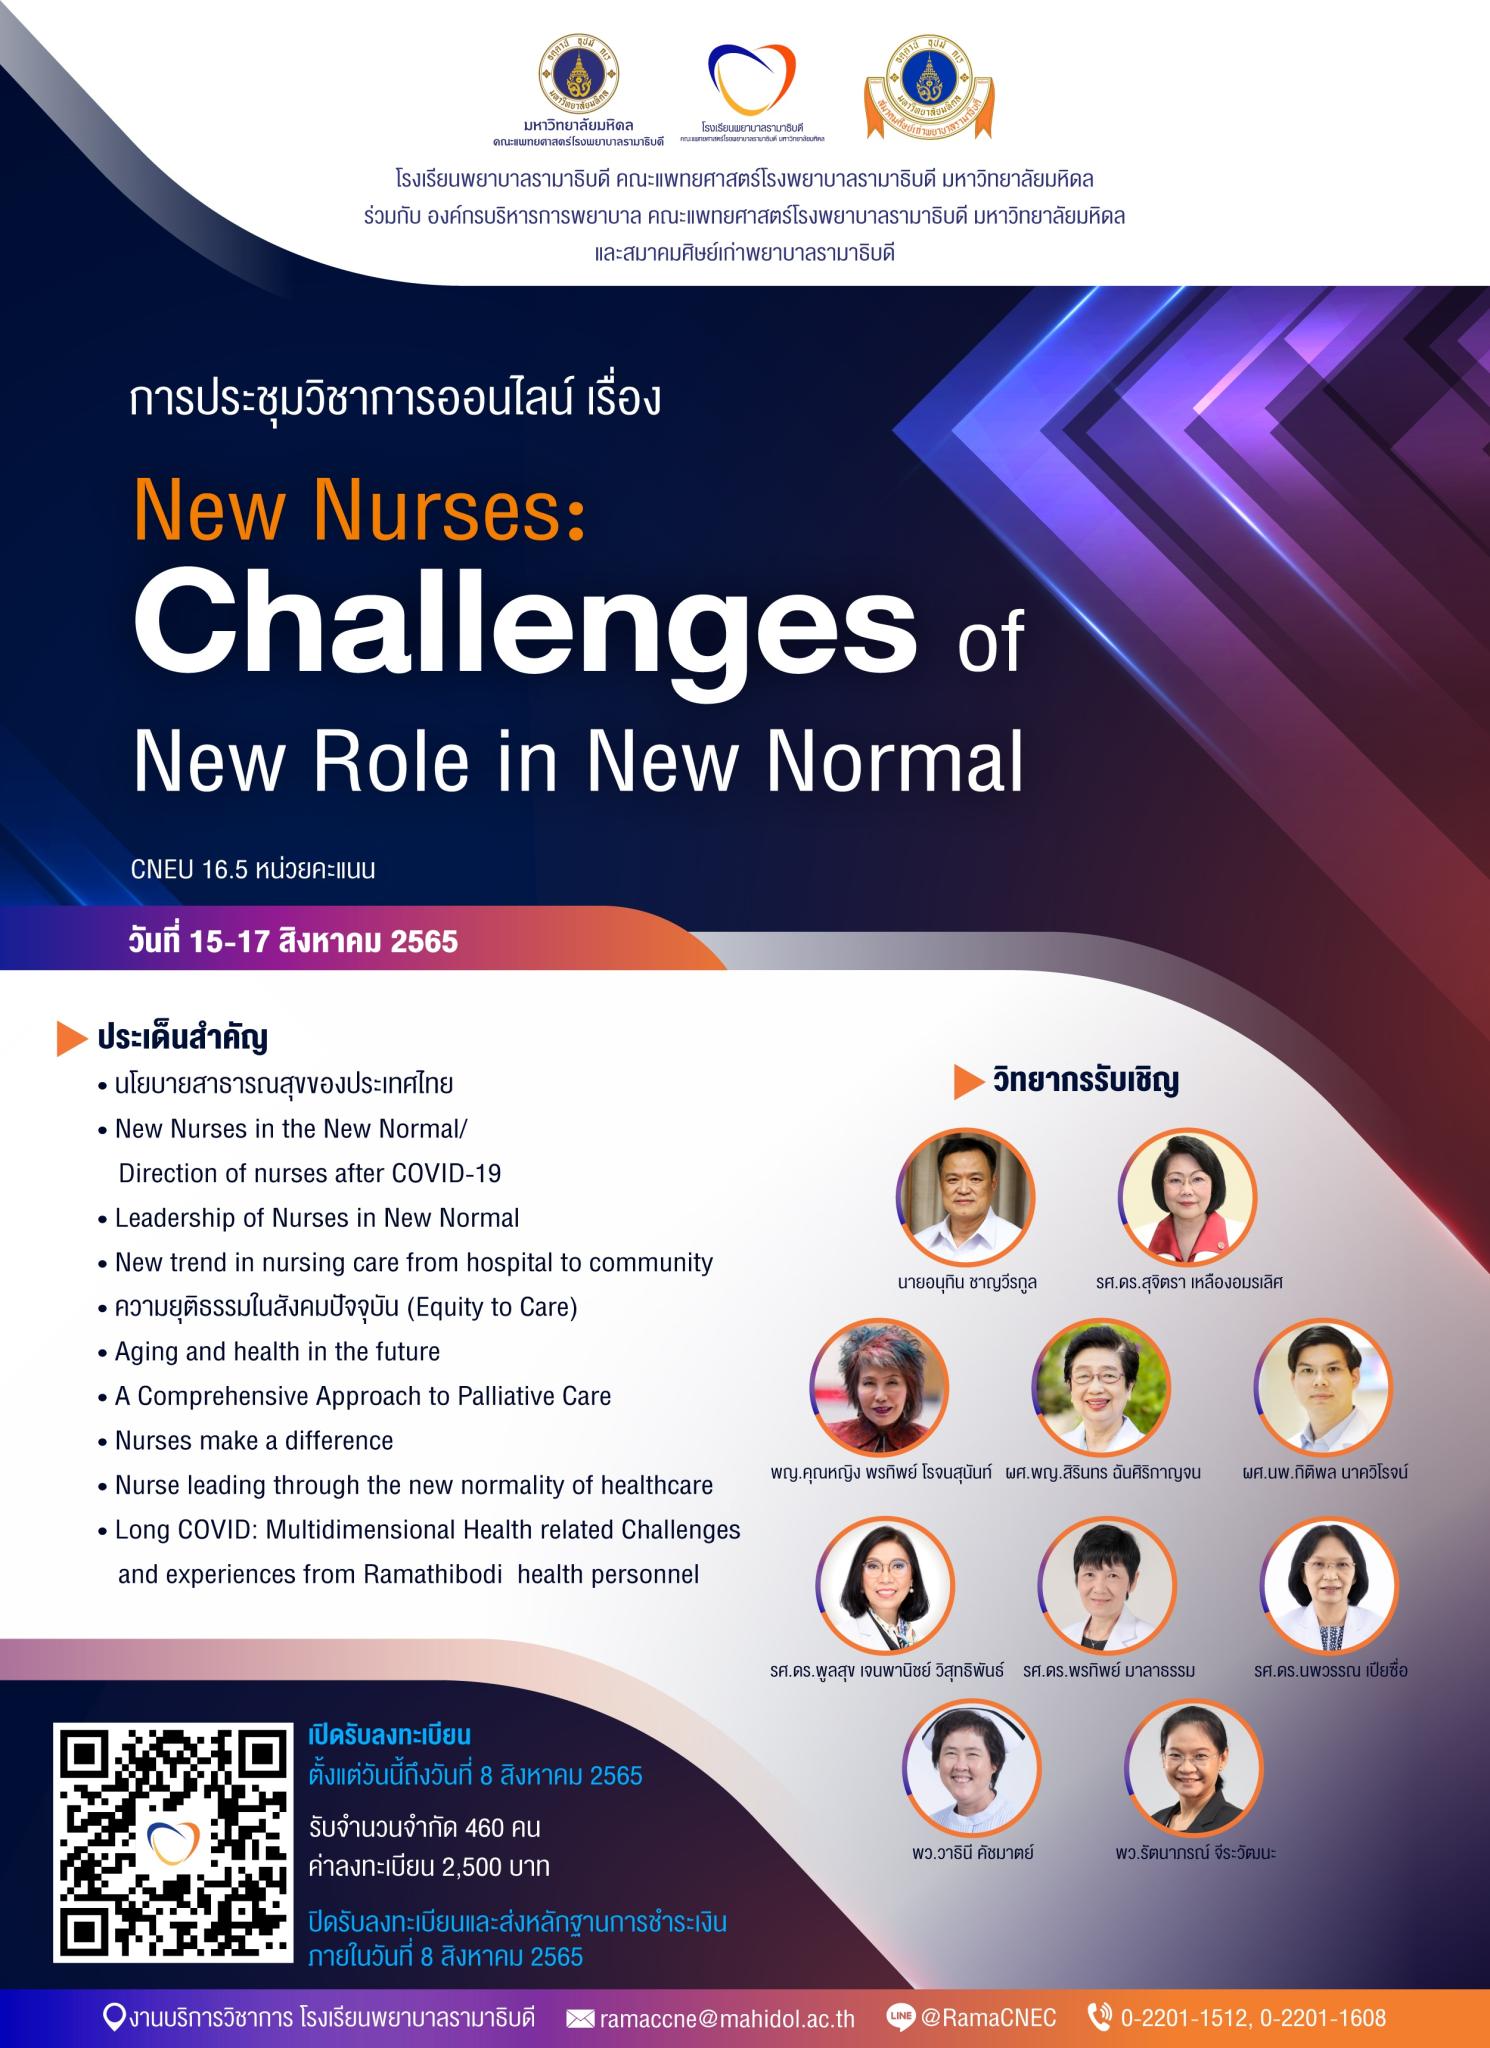 New Nurses: Challenges of New Role in New Normal